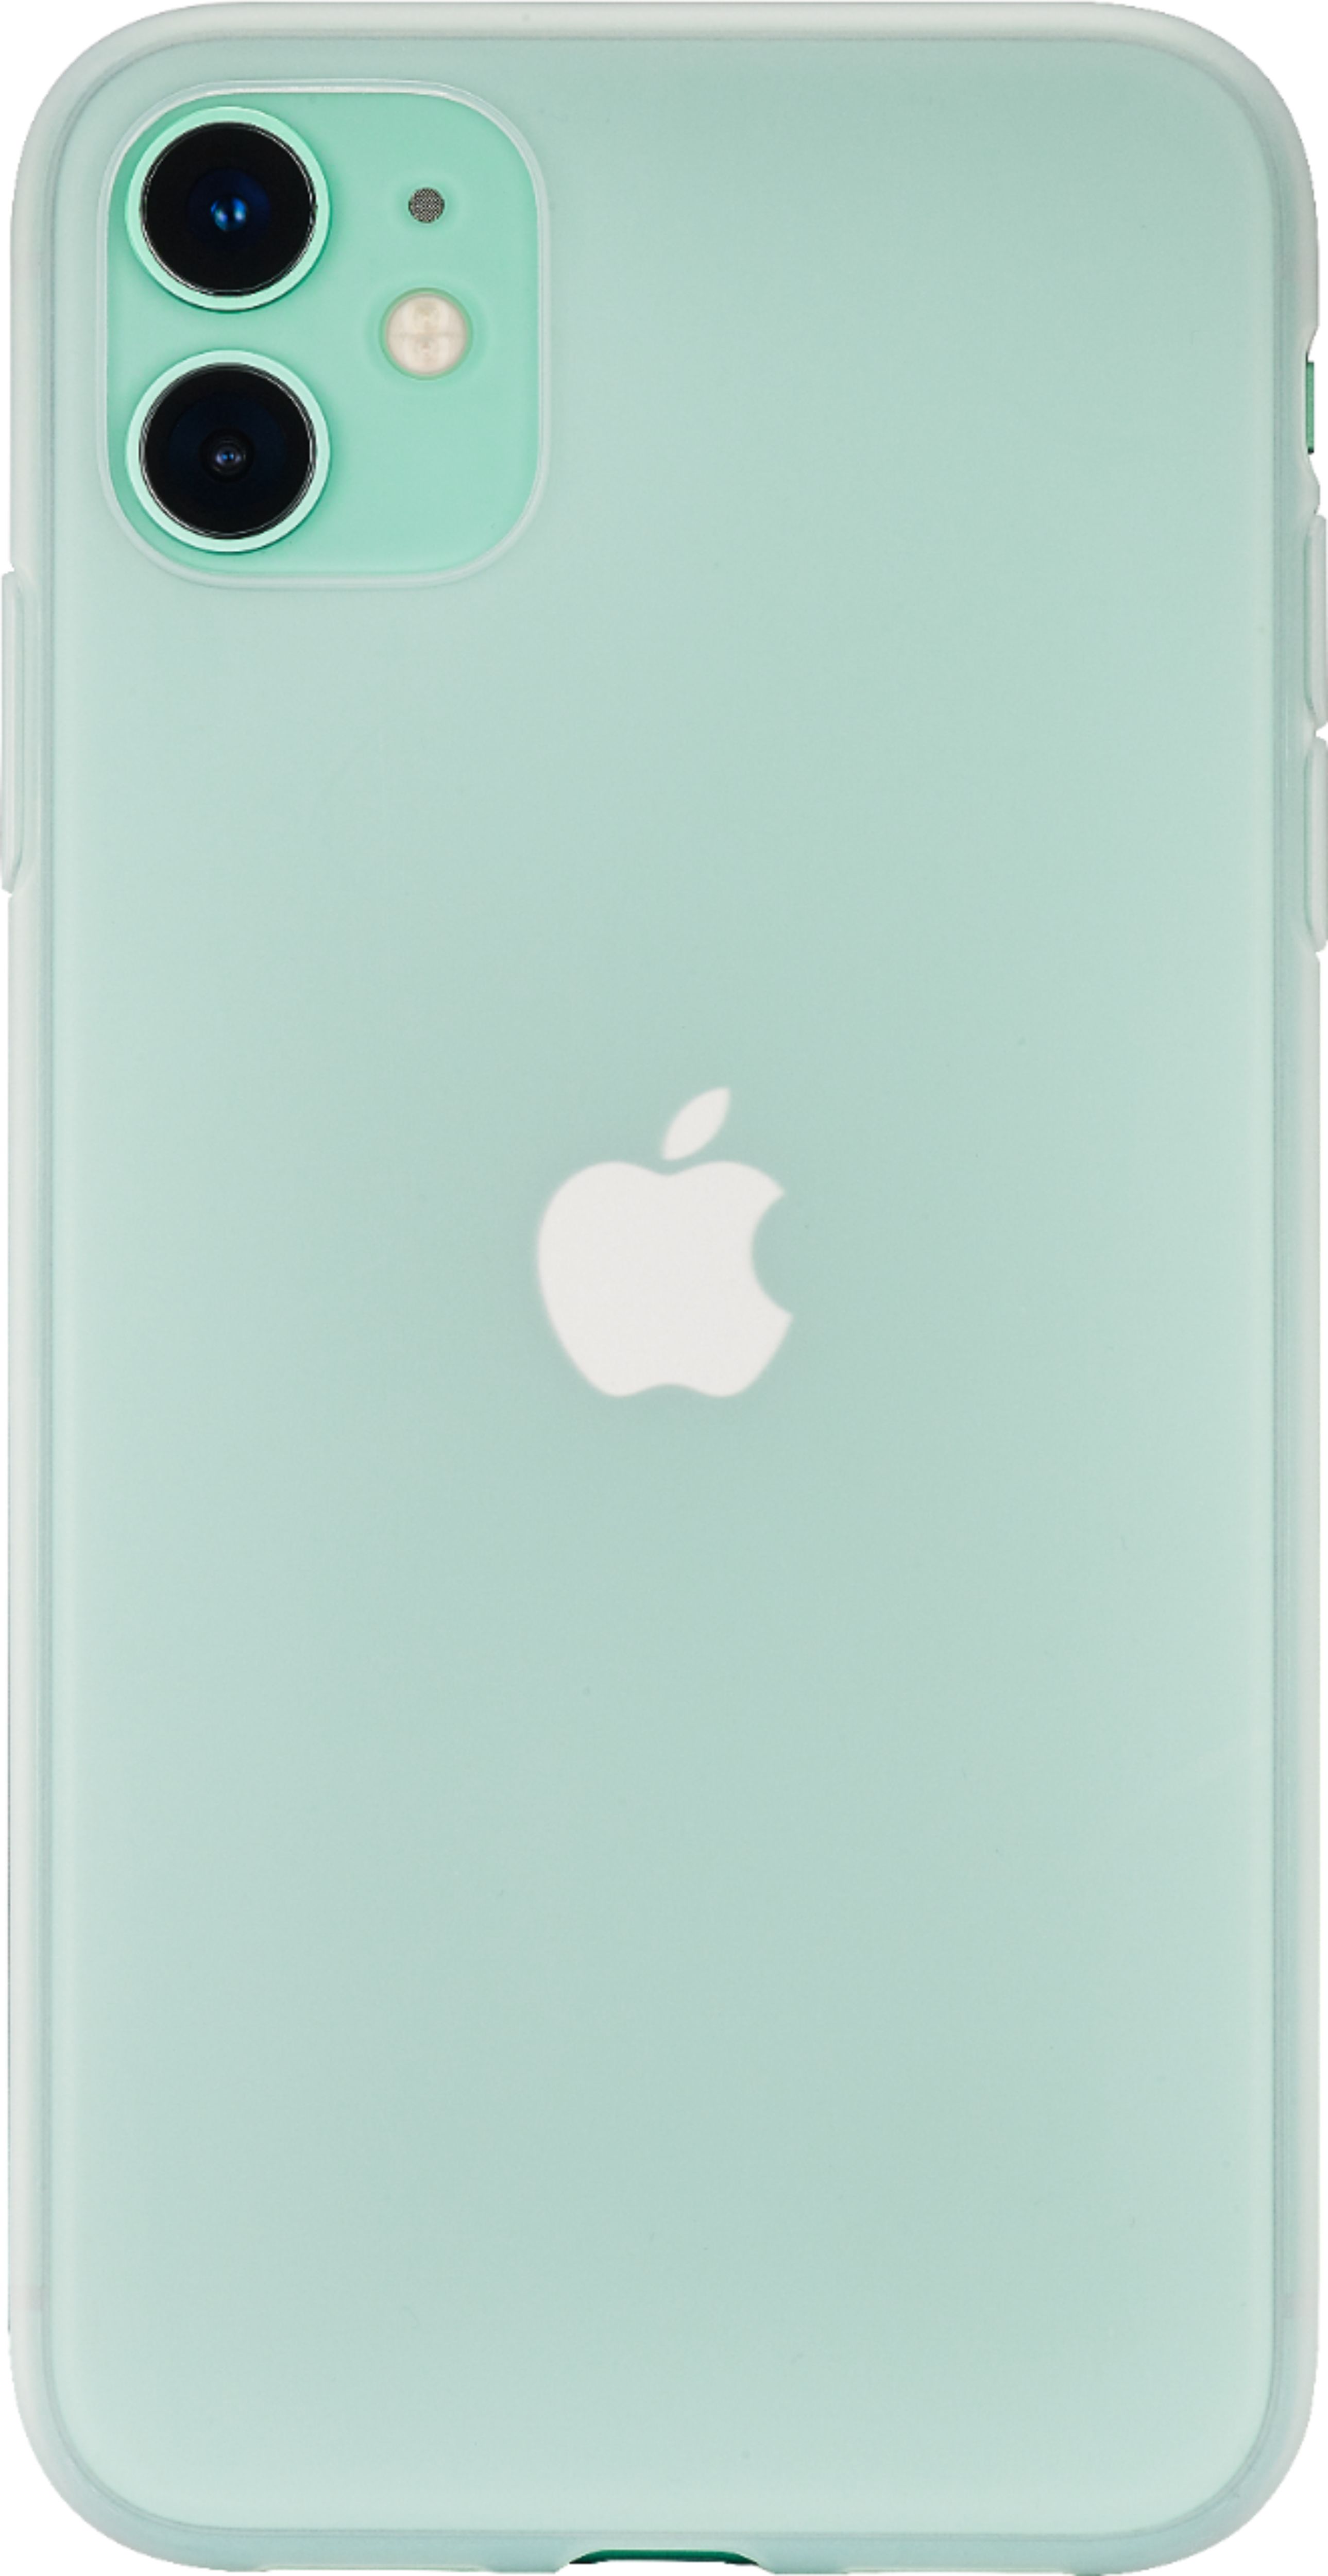 Insignia Ultra Thin Wrap Case For Apple Iphone 11 Smoky Clear Ns Maximutc Best Buy